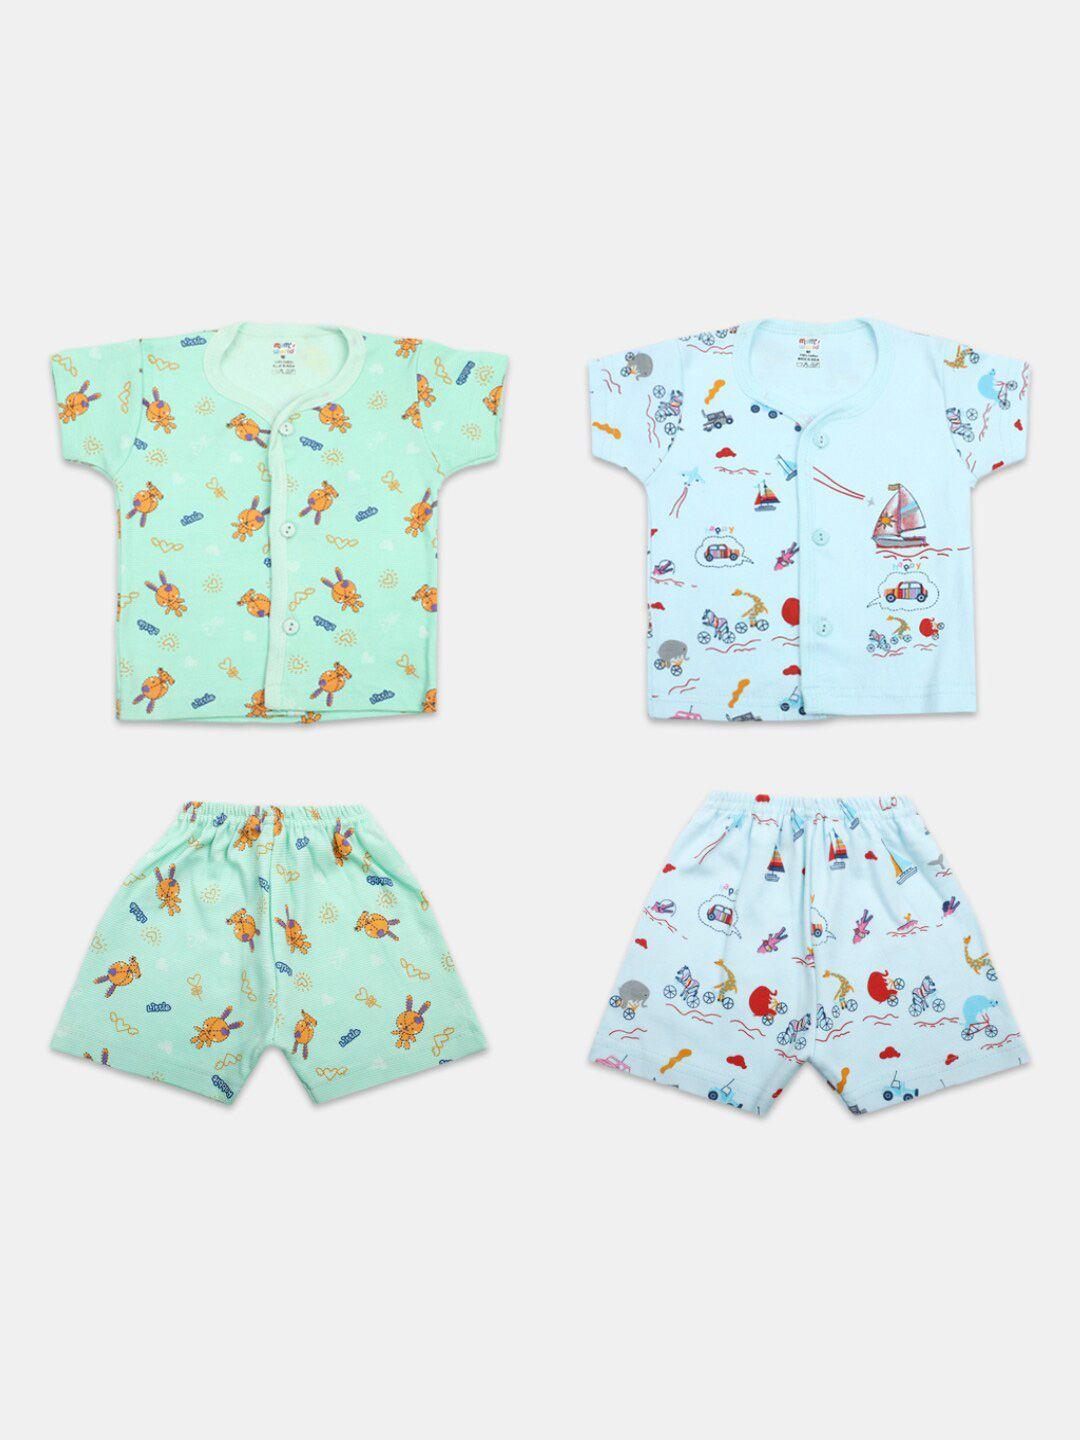 v-mart kids pack of 2 printed pure cotton shirt with shorts